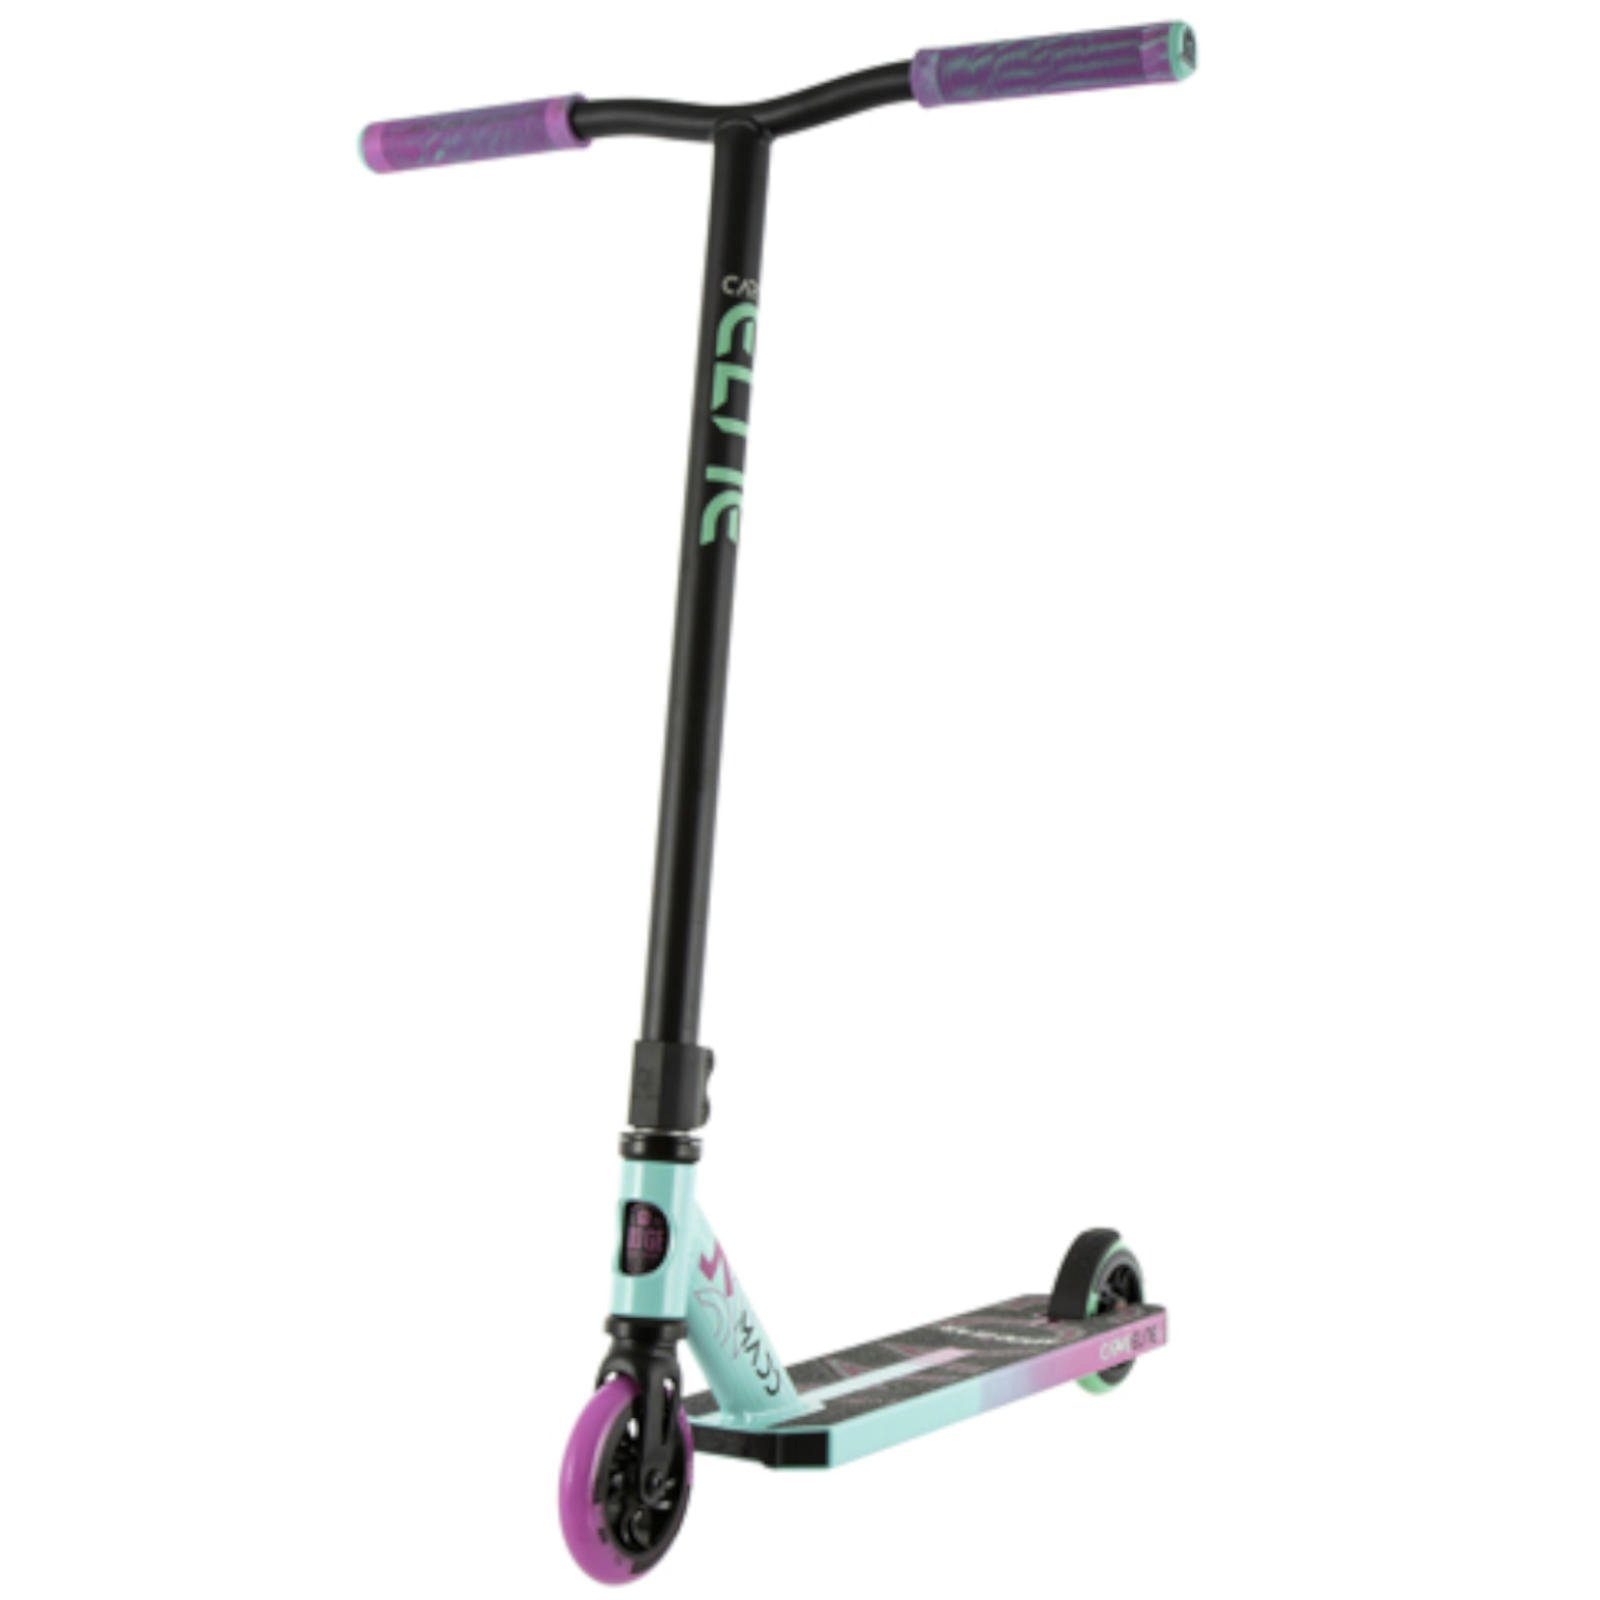 Madd Scooter Pink Teal